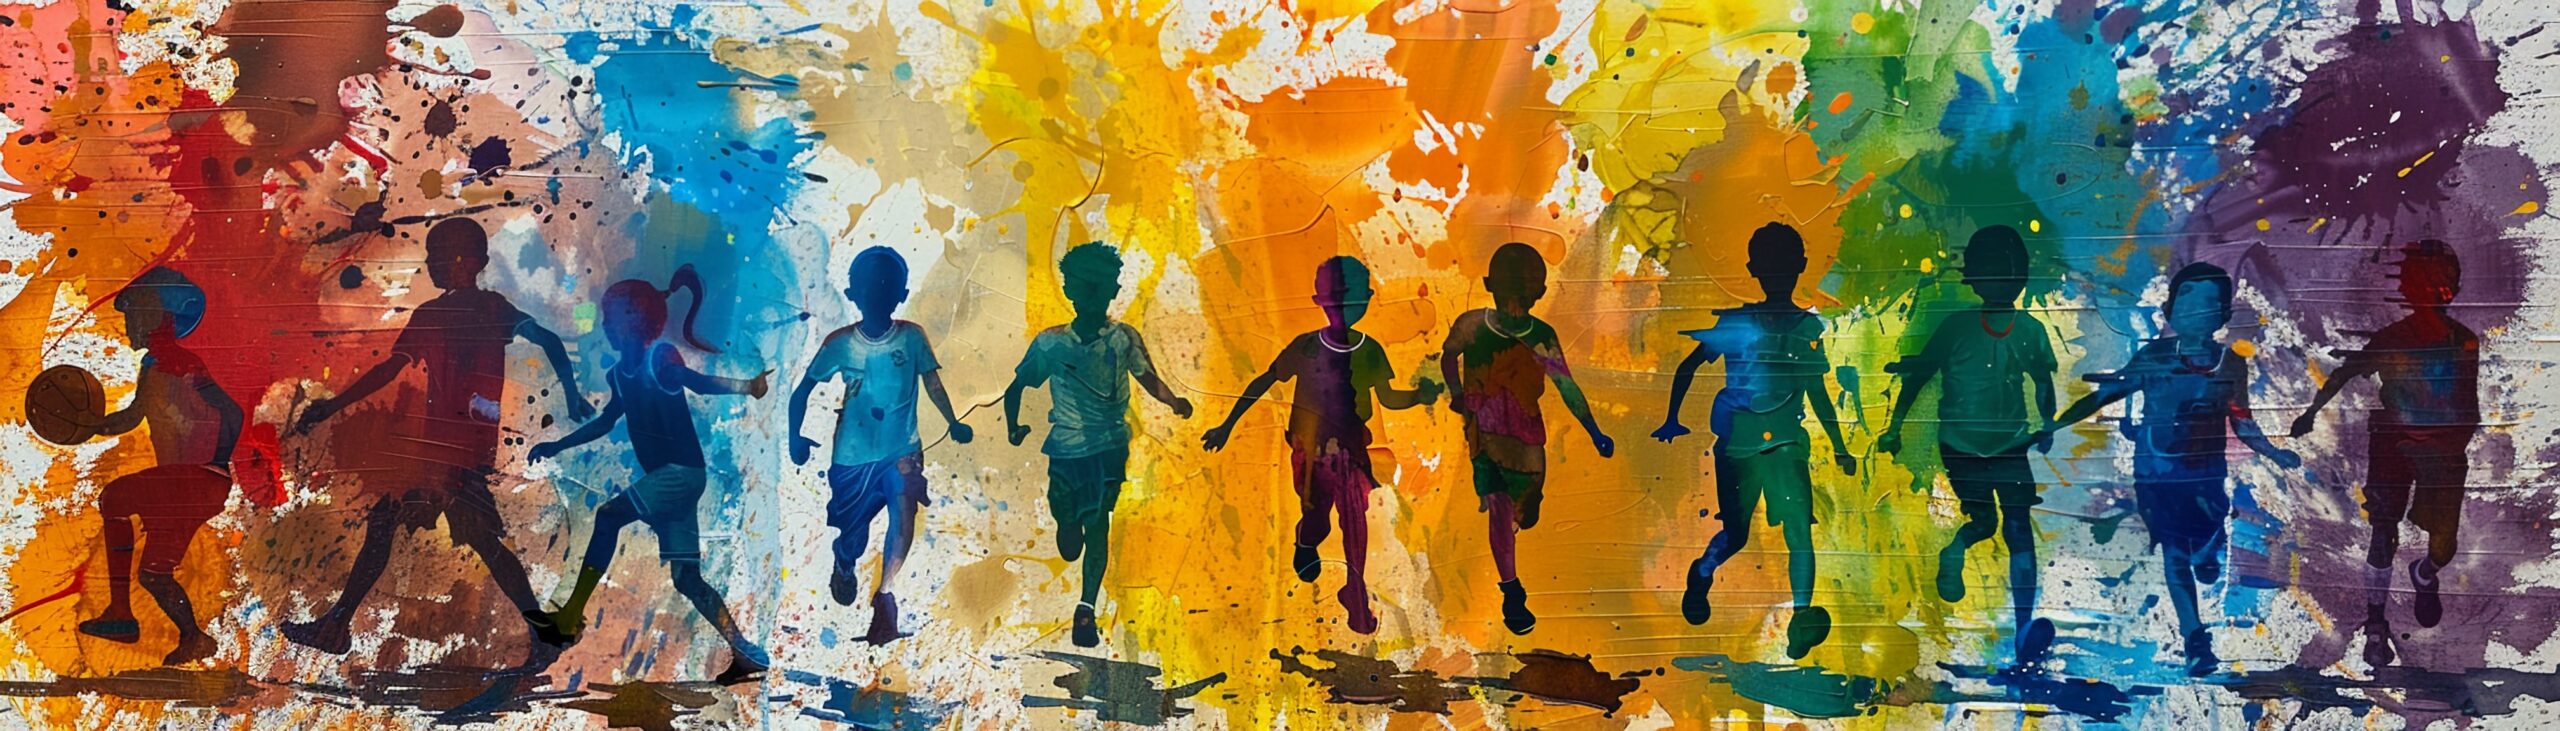 Youth sports team portrayed in a vibrant art piece